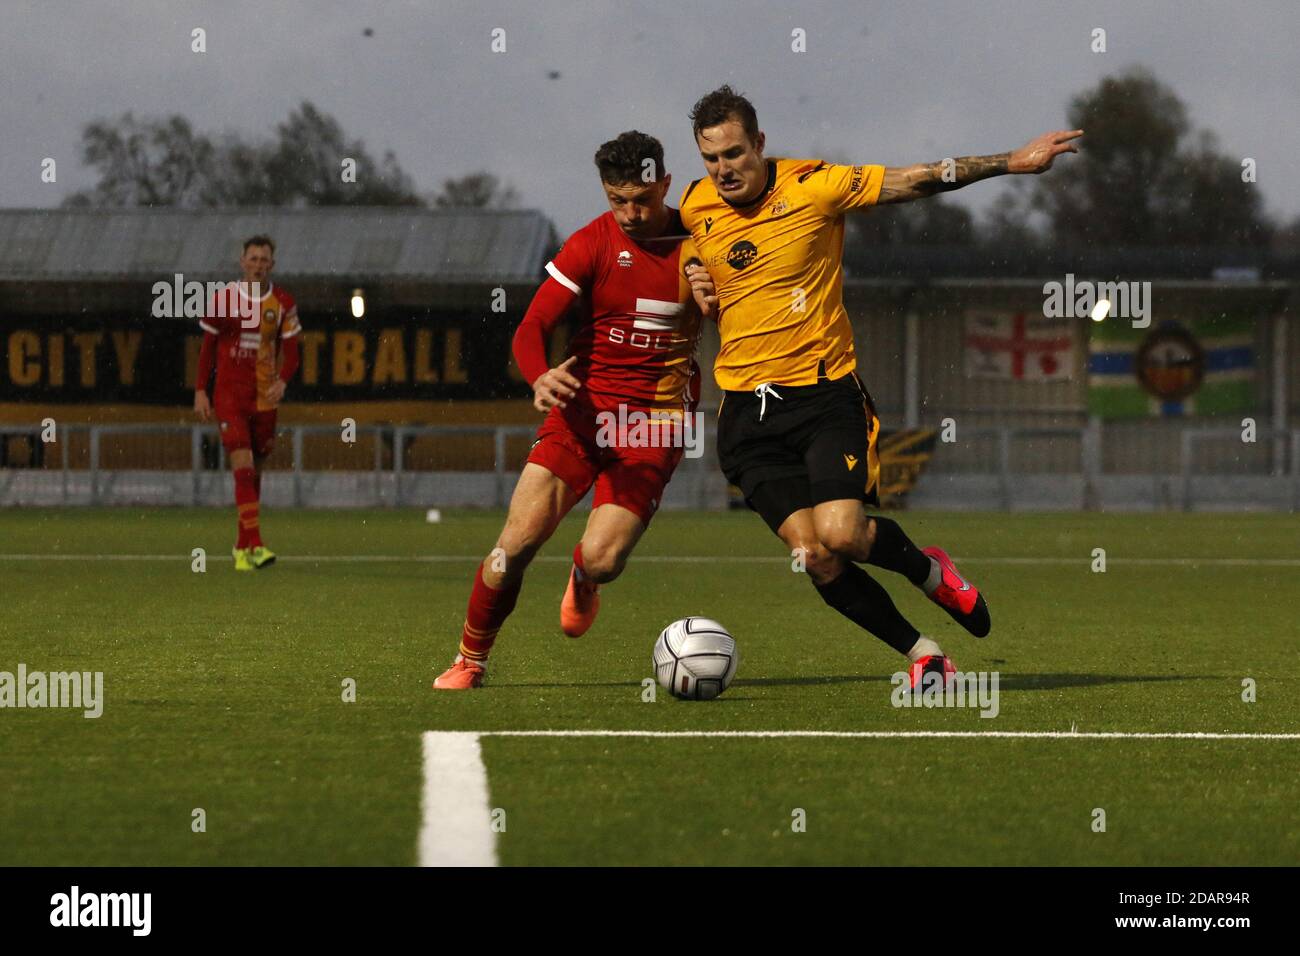 Gloucester, UK. 14th Nov, 2020. Matt McClure (#10 Gloucester City AFC) runs towards forward with the ball during the Vanarama National League North game between Gloucester City AFC and Bradford (Park Avenue) AFC at New Meadow Park in Gloucester. ( Kieran Riley/SSP Credit: SPP Sport Press Photo. /Alamy Live News Stock Photo